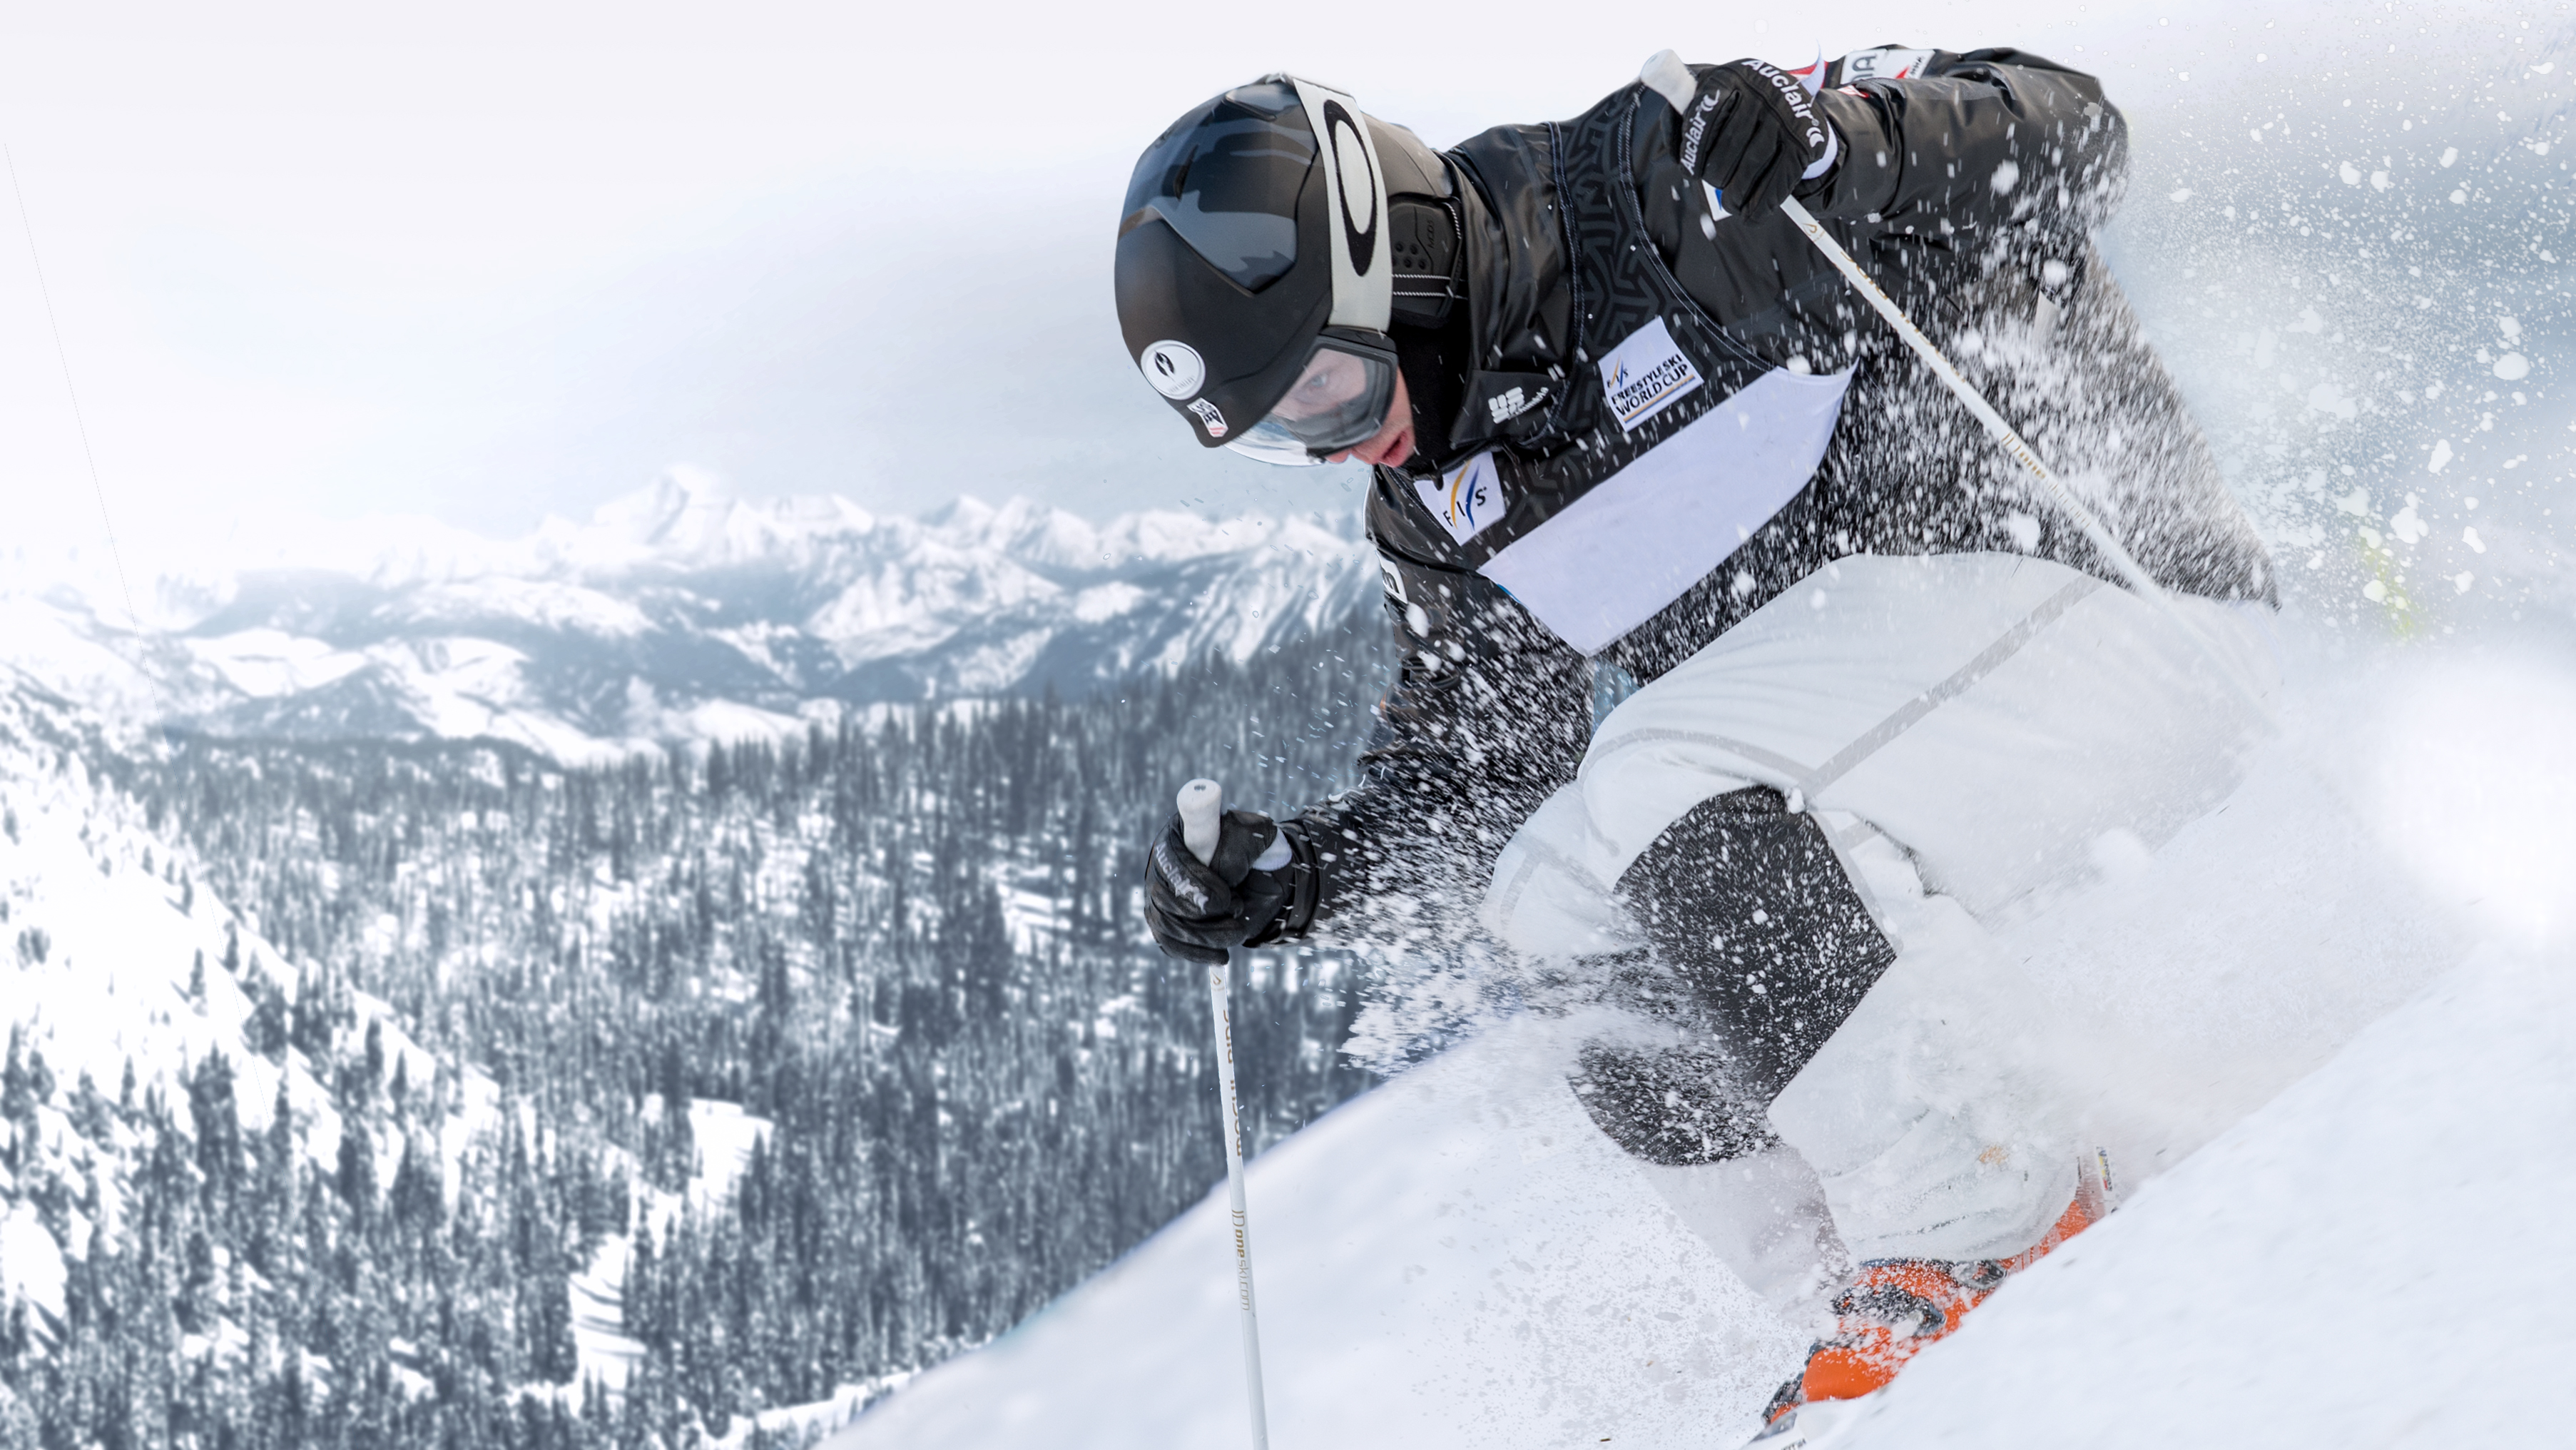 Bryon Wilson competes in a 2018 FIS World Cup mogul event at Deer Valley, Utah. Photo credit: Kelly Gorham.